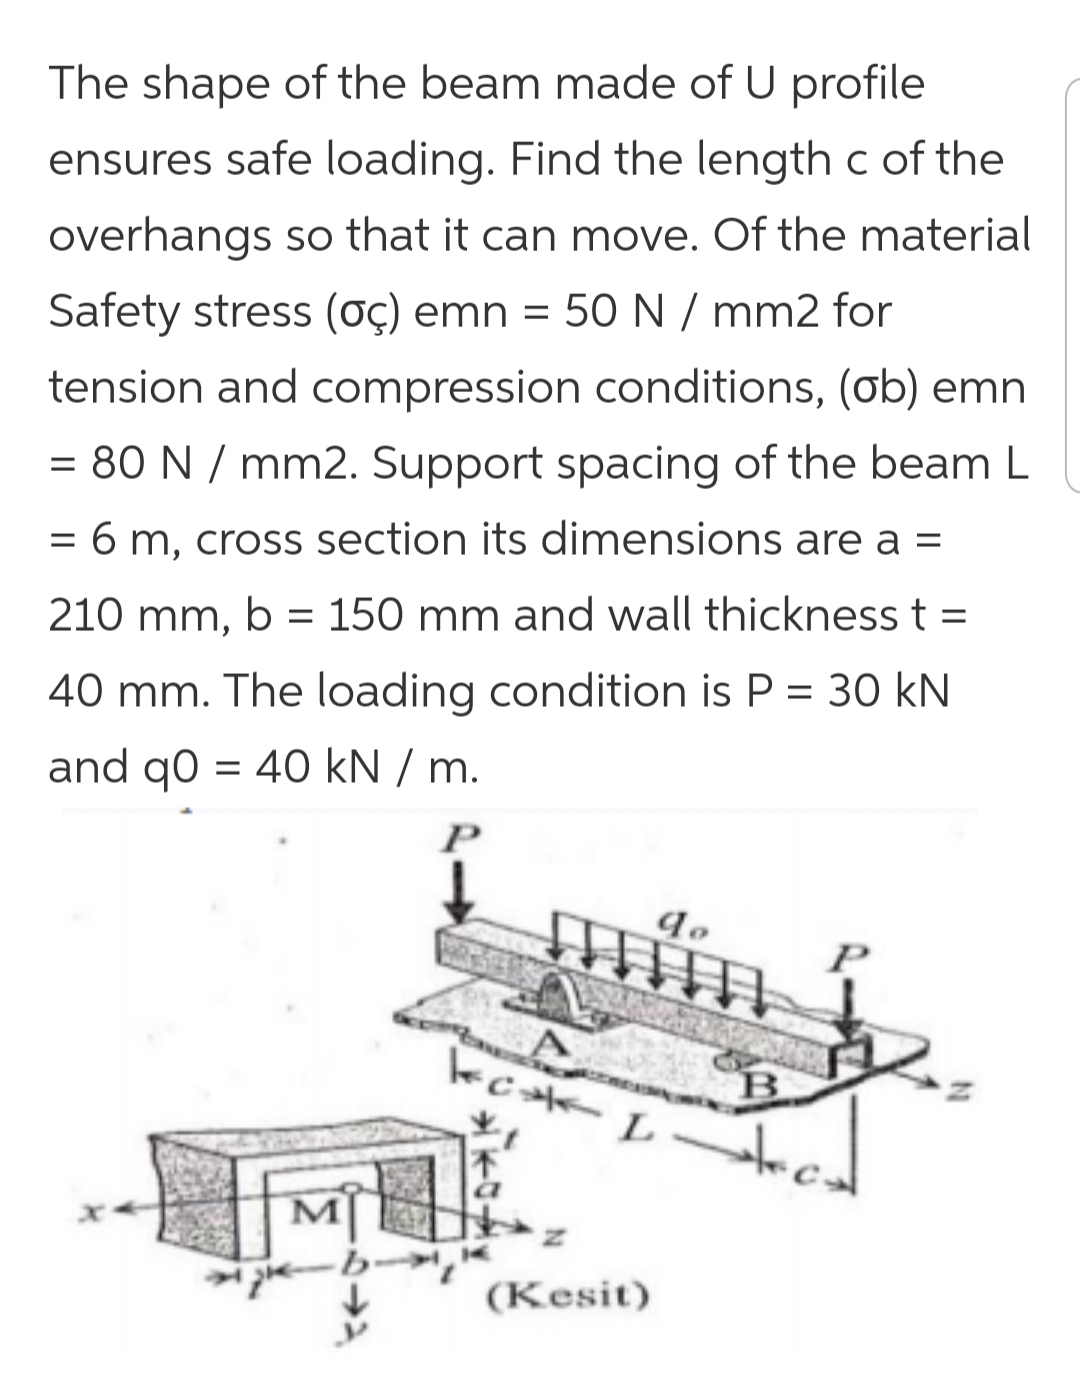 The shape of the beam made of U profile
ensures safe loading. Find the length c of the
overhangs so that it can move. Of the material
Safety stress (ç) emn
= 50 N / mm2 for
tension and compression conditions, (ob) emn
= 80 N / mm2. Support spacing of the beam L
= 6 m, cross section its dimensions are a =
%D
210 mm, b = 150 mm and wall thickness t =
40 mm. The loading condition is P = 30 kN
and qo = 40 kN / m.
P
B
(Kesit)
